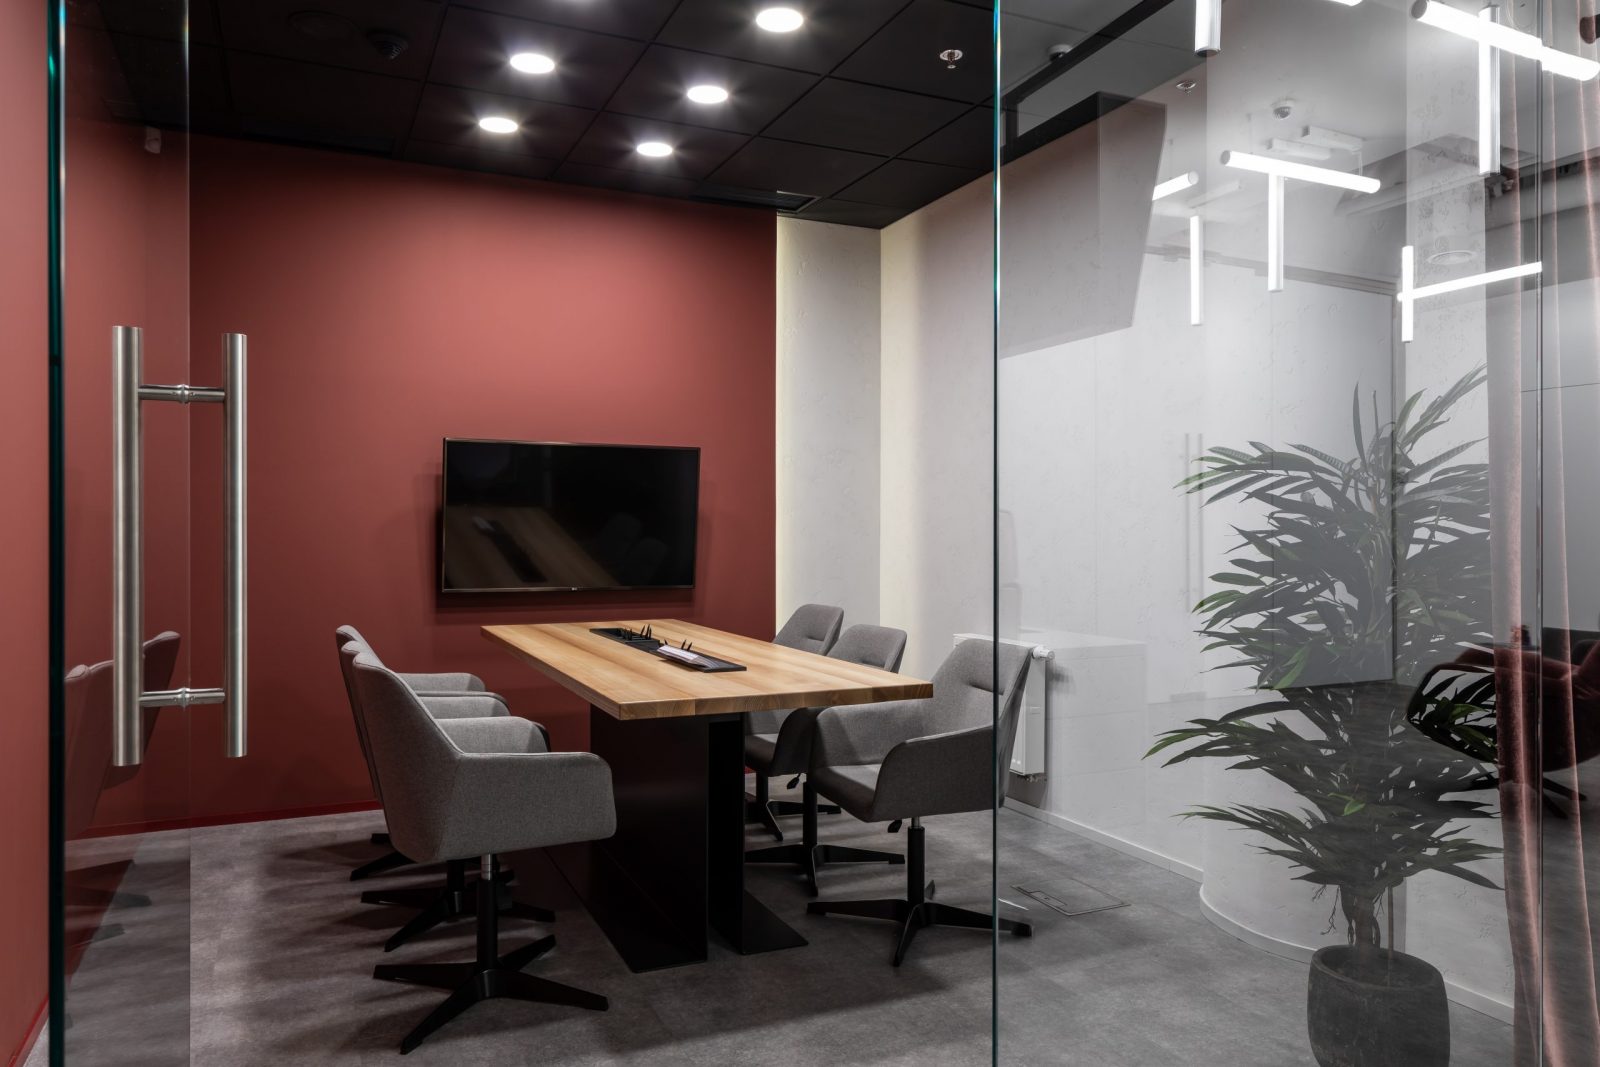 Design and/or functionality which offices make money 2